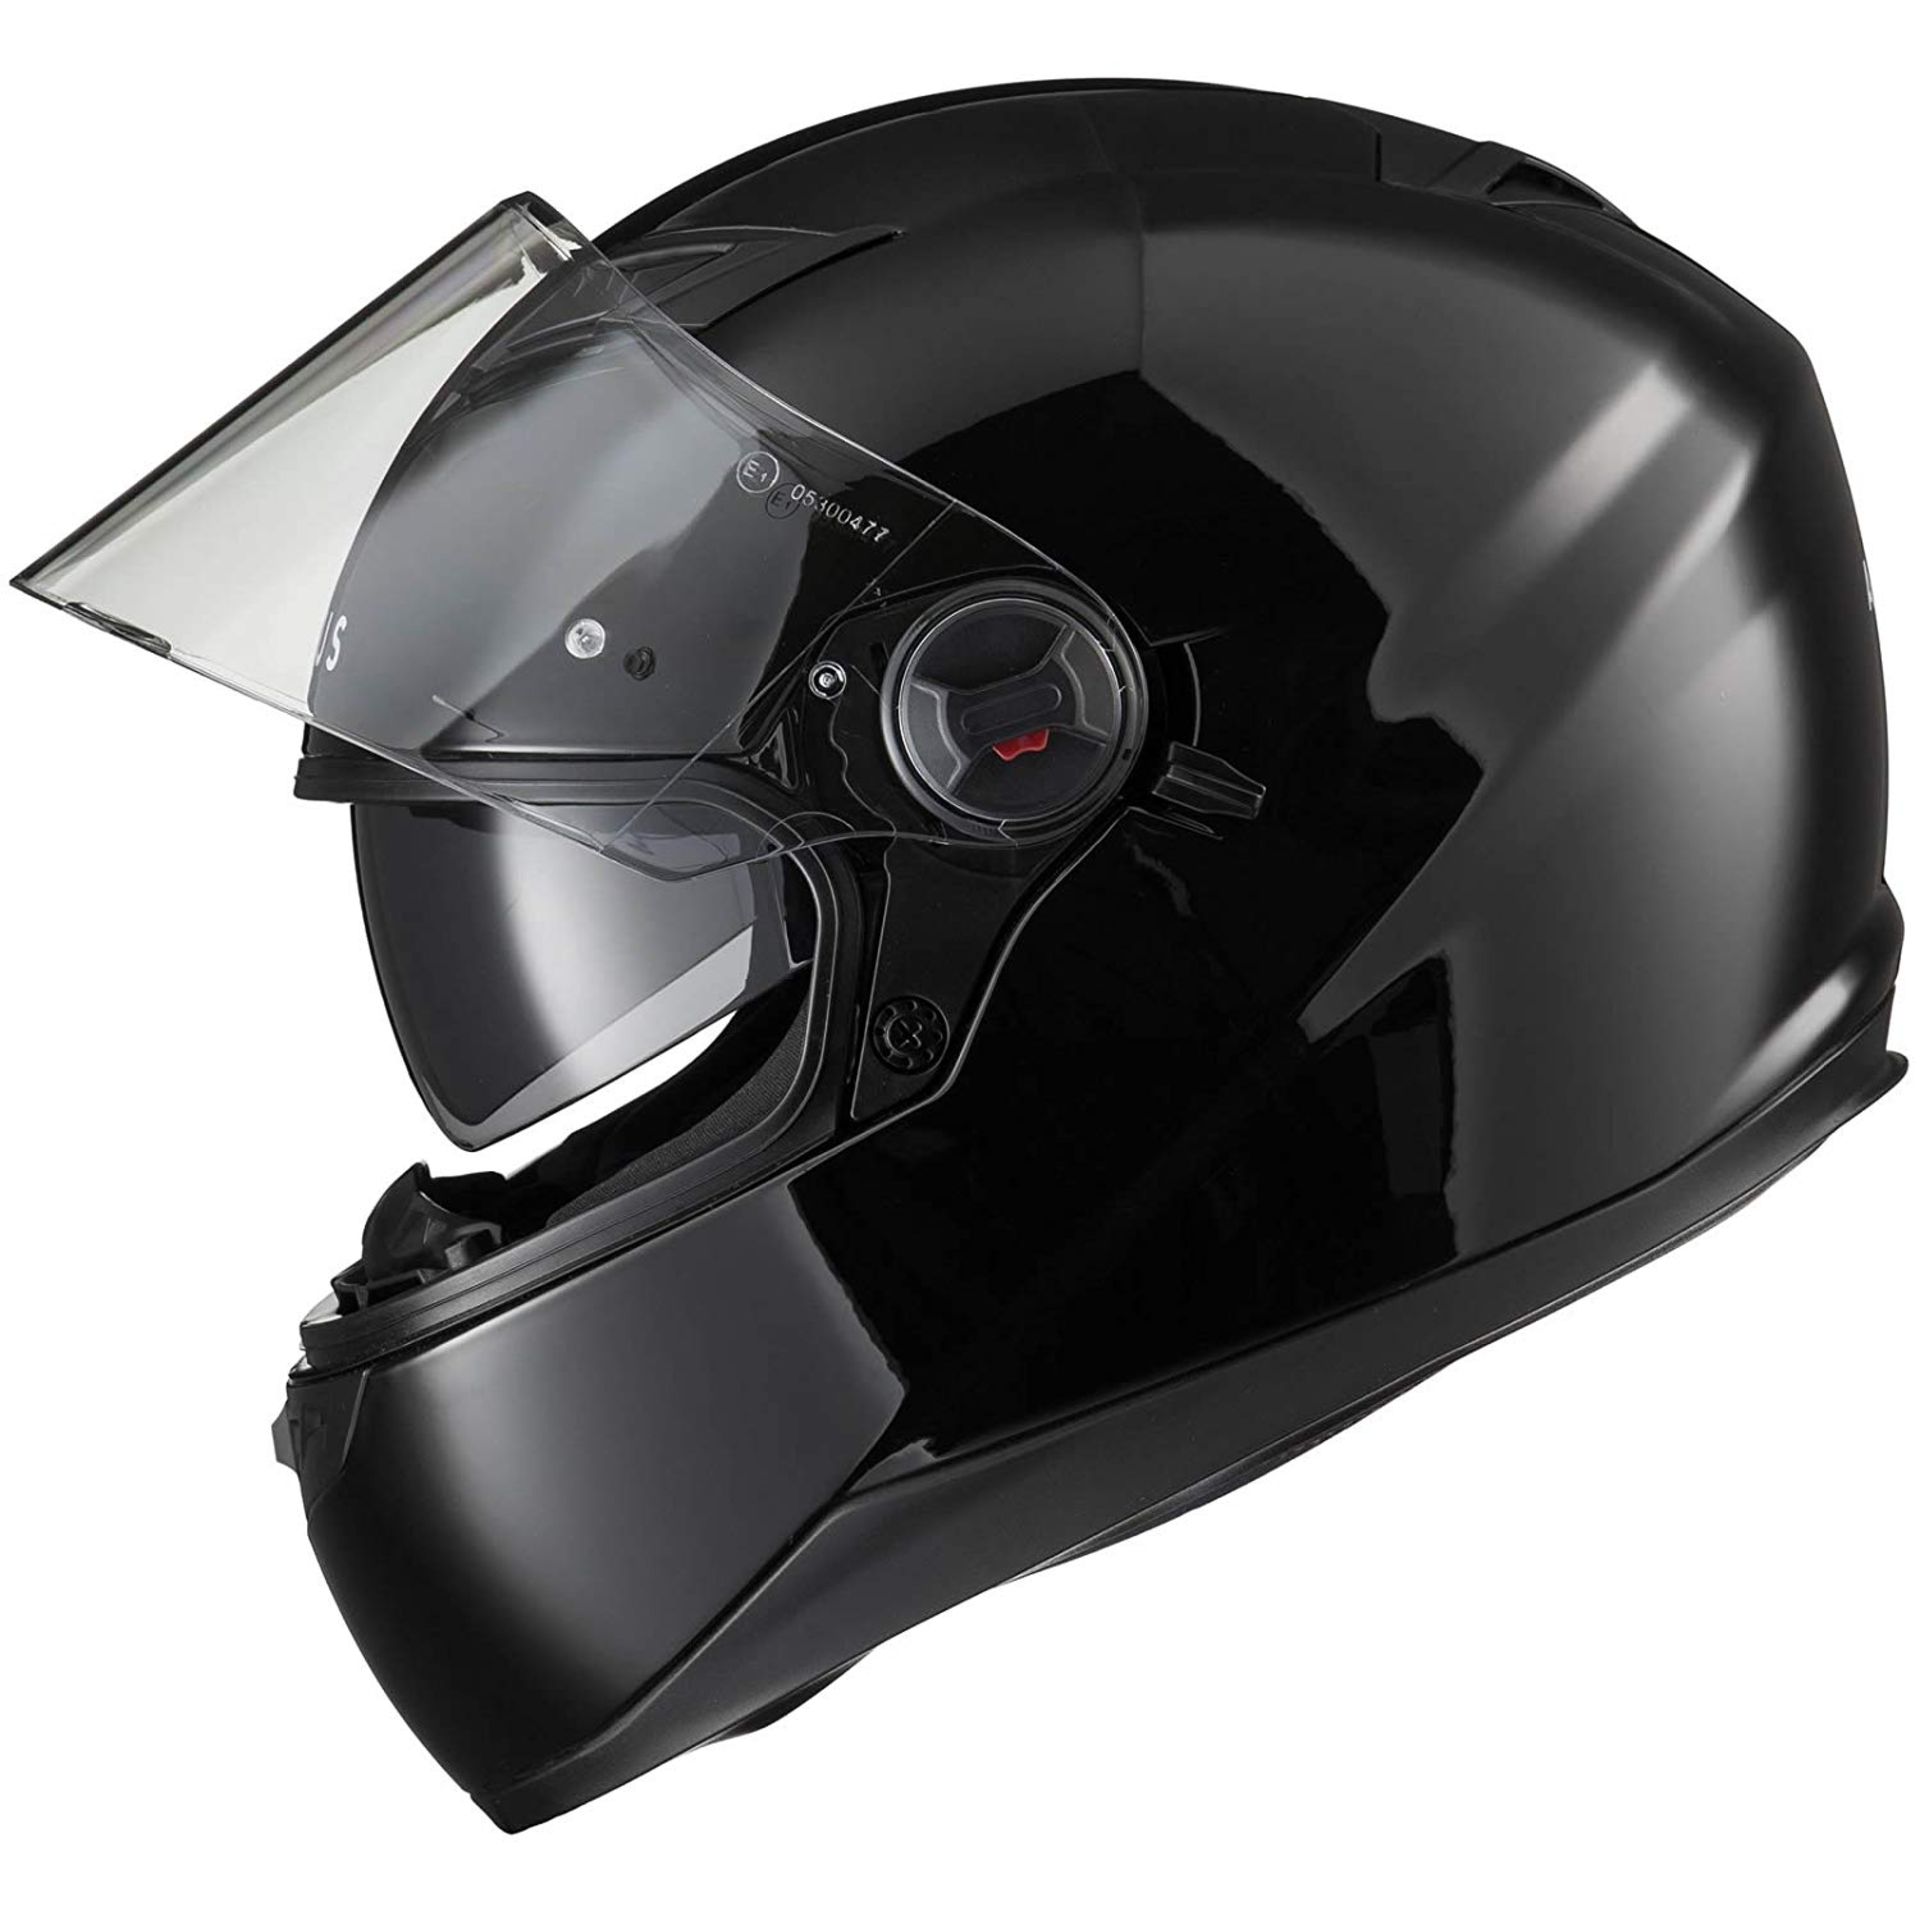 Brand new Agrius Rage SV Solid Motorcycle Helmet XXL Gloss